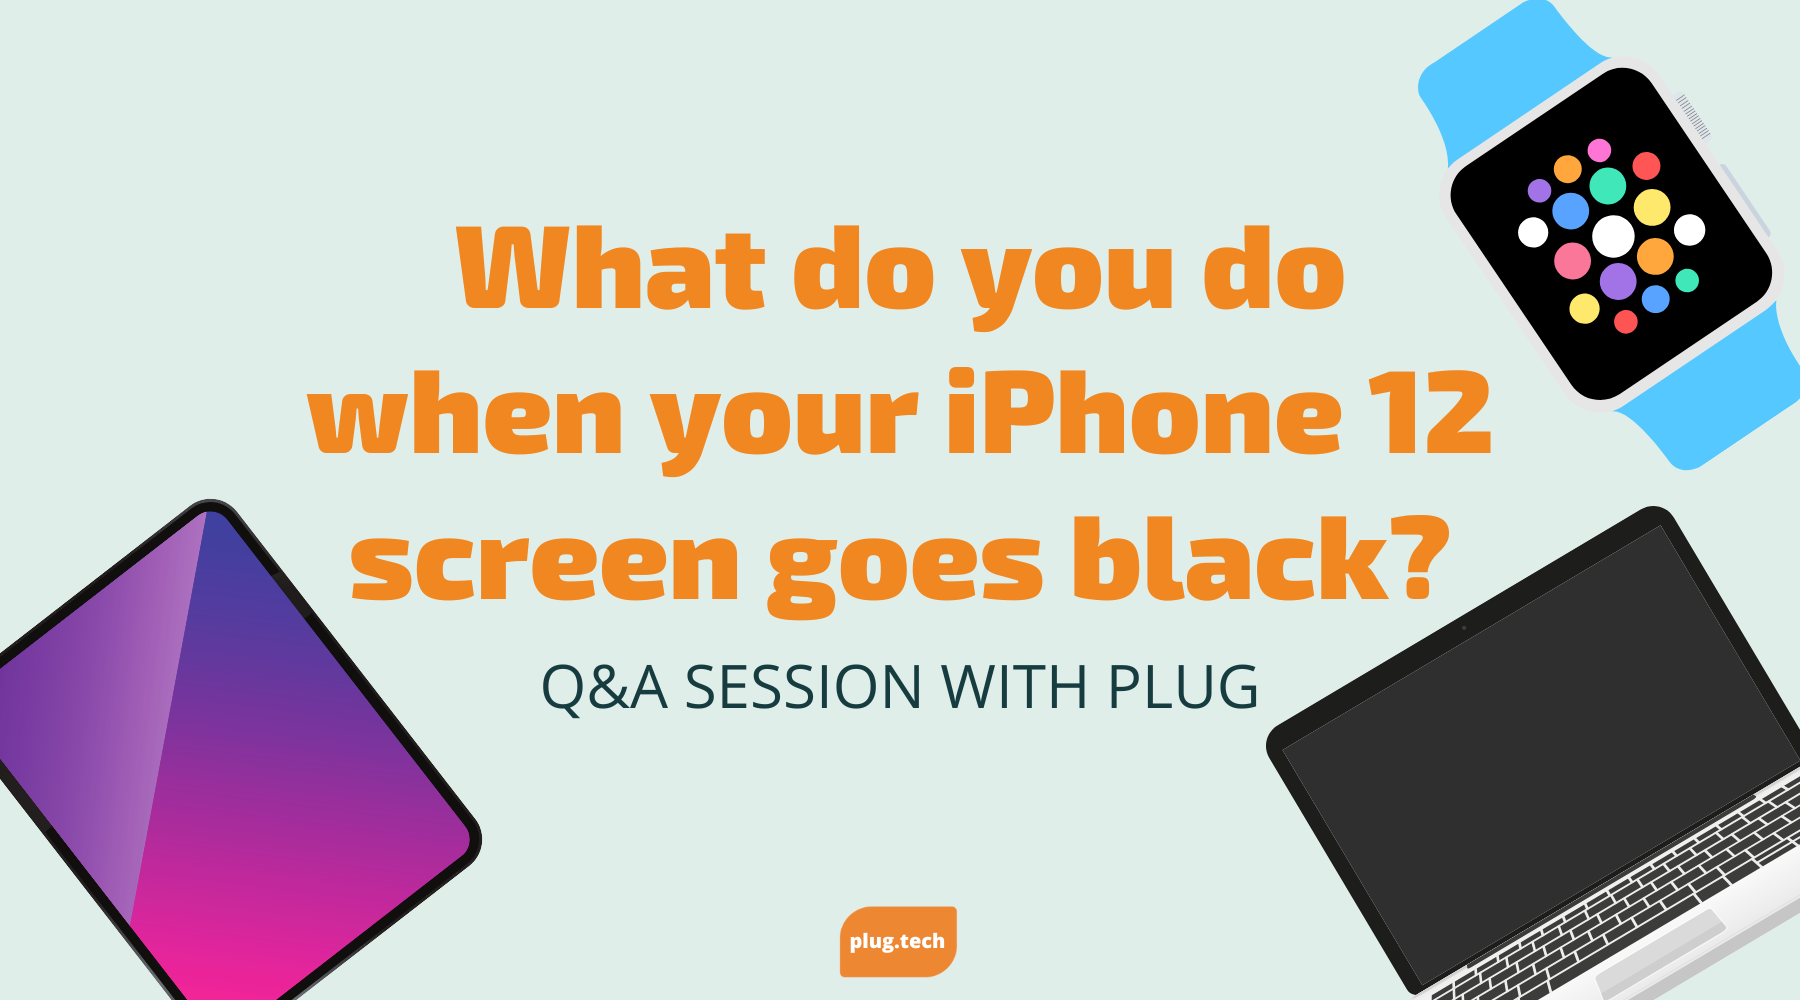 What do you do when your iPhone 12 screen goes black?